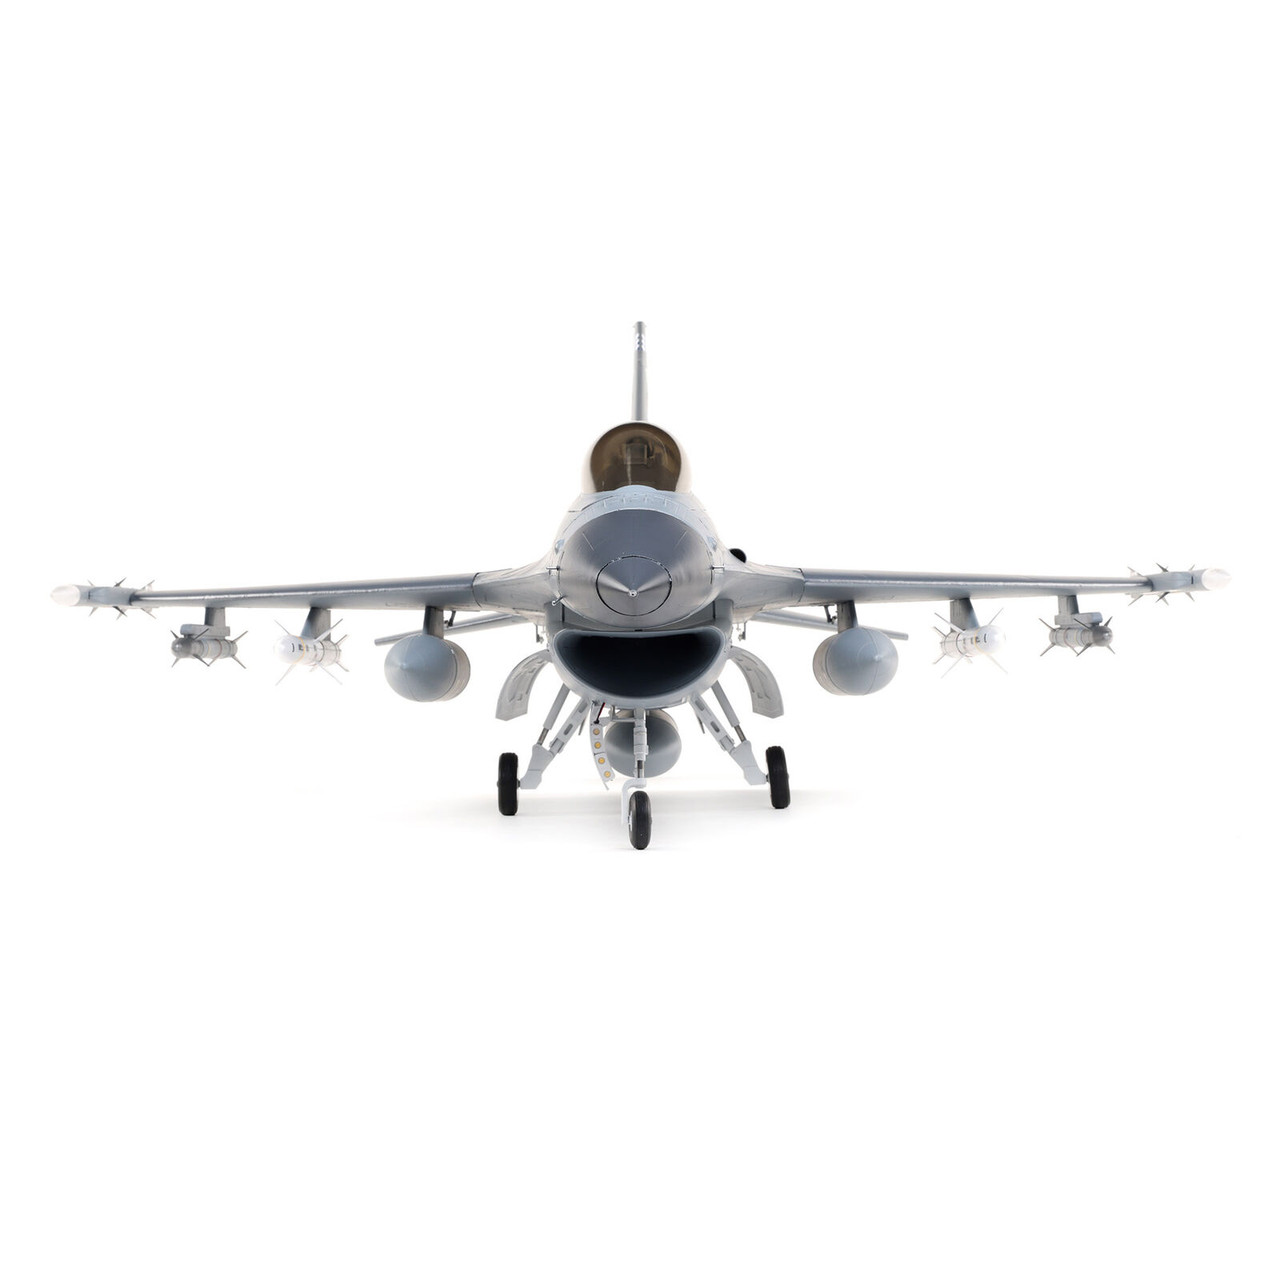 Eflite F-16 Falcon 80mm EDF Jet Smart BNF Basic with SAFE Select, 1000mm